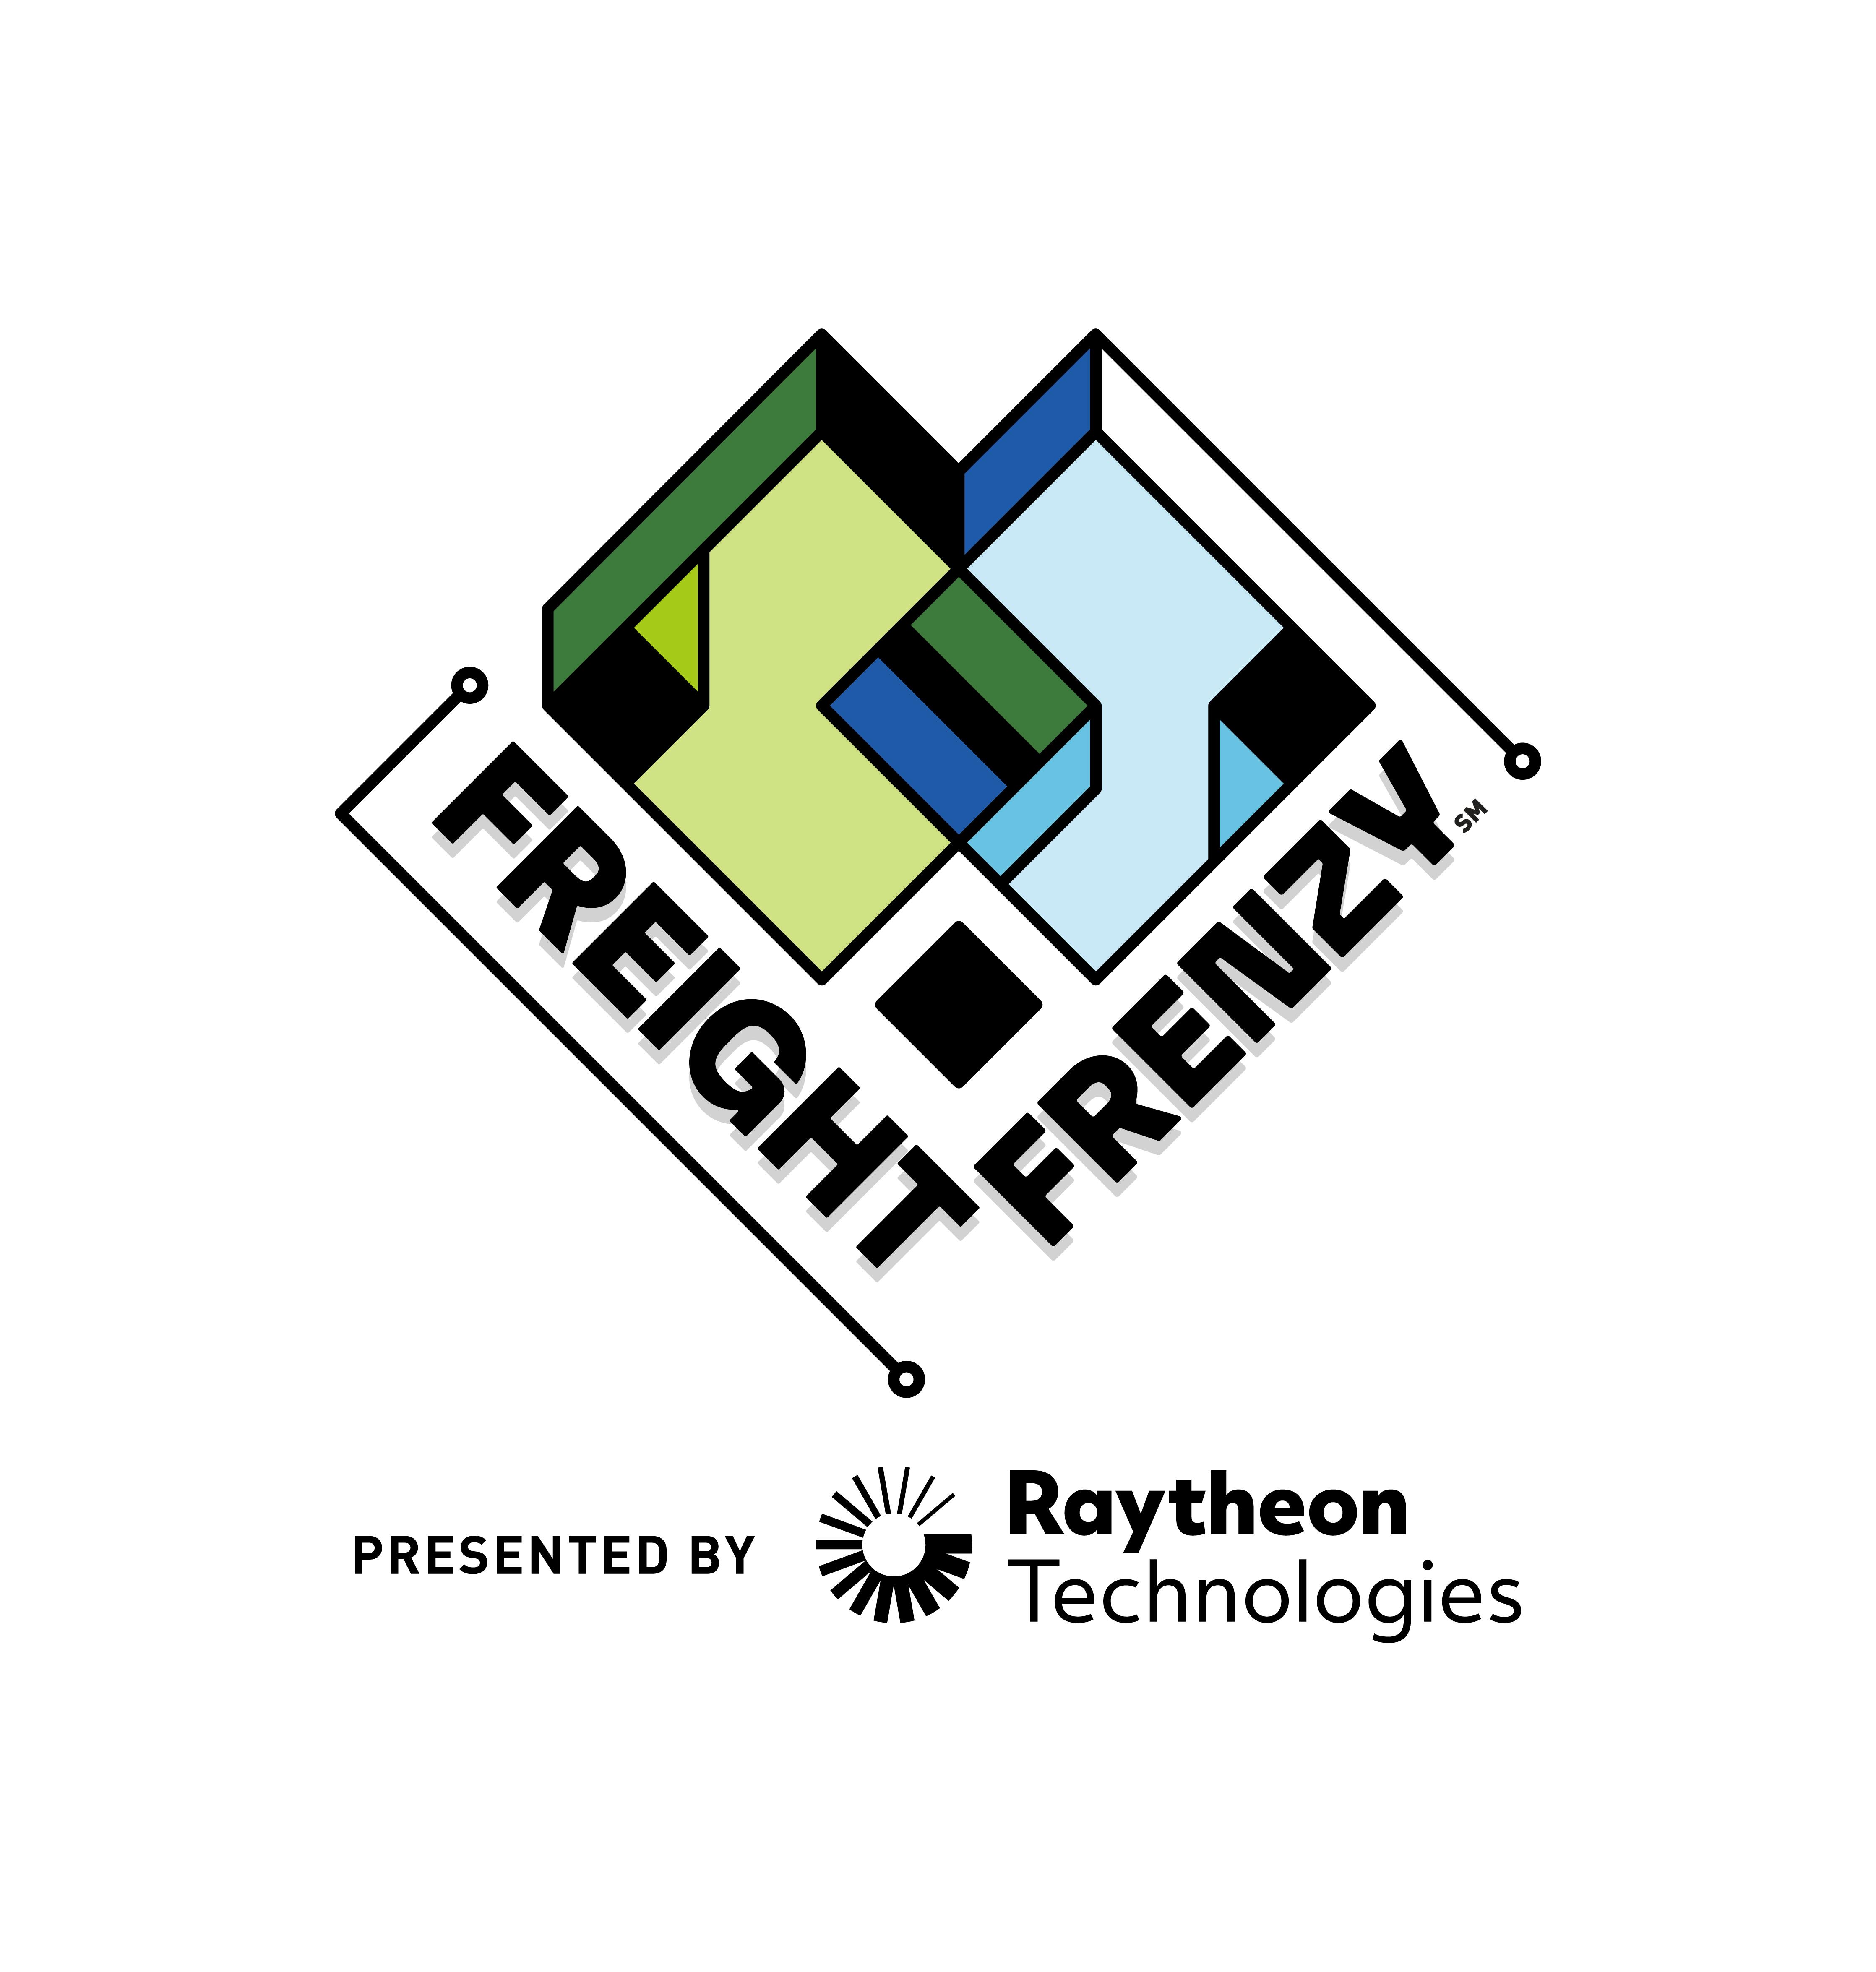 Freight Frenzy by Raytheon